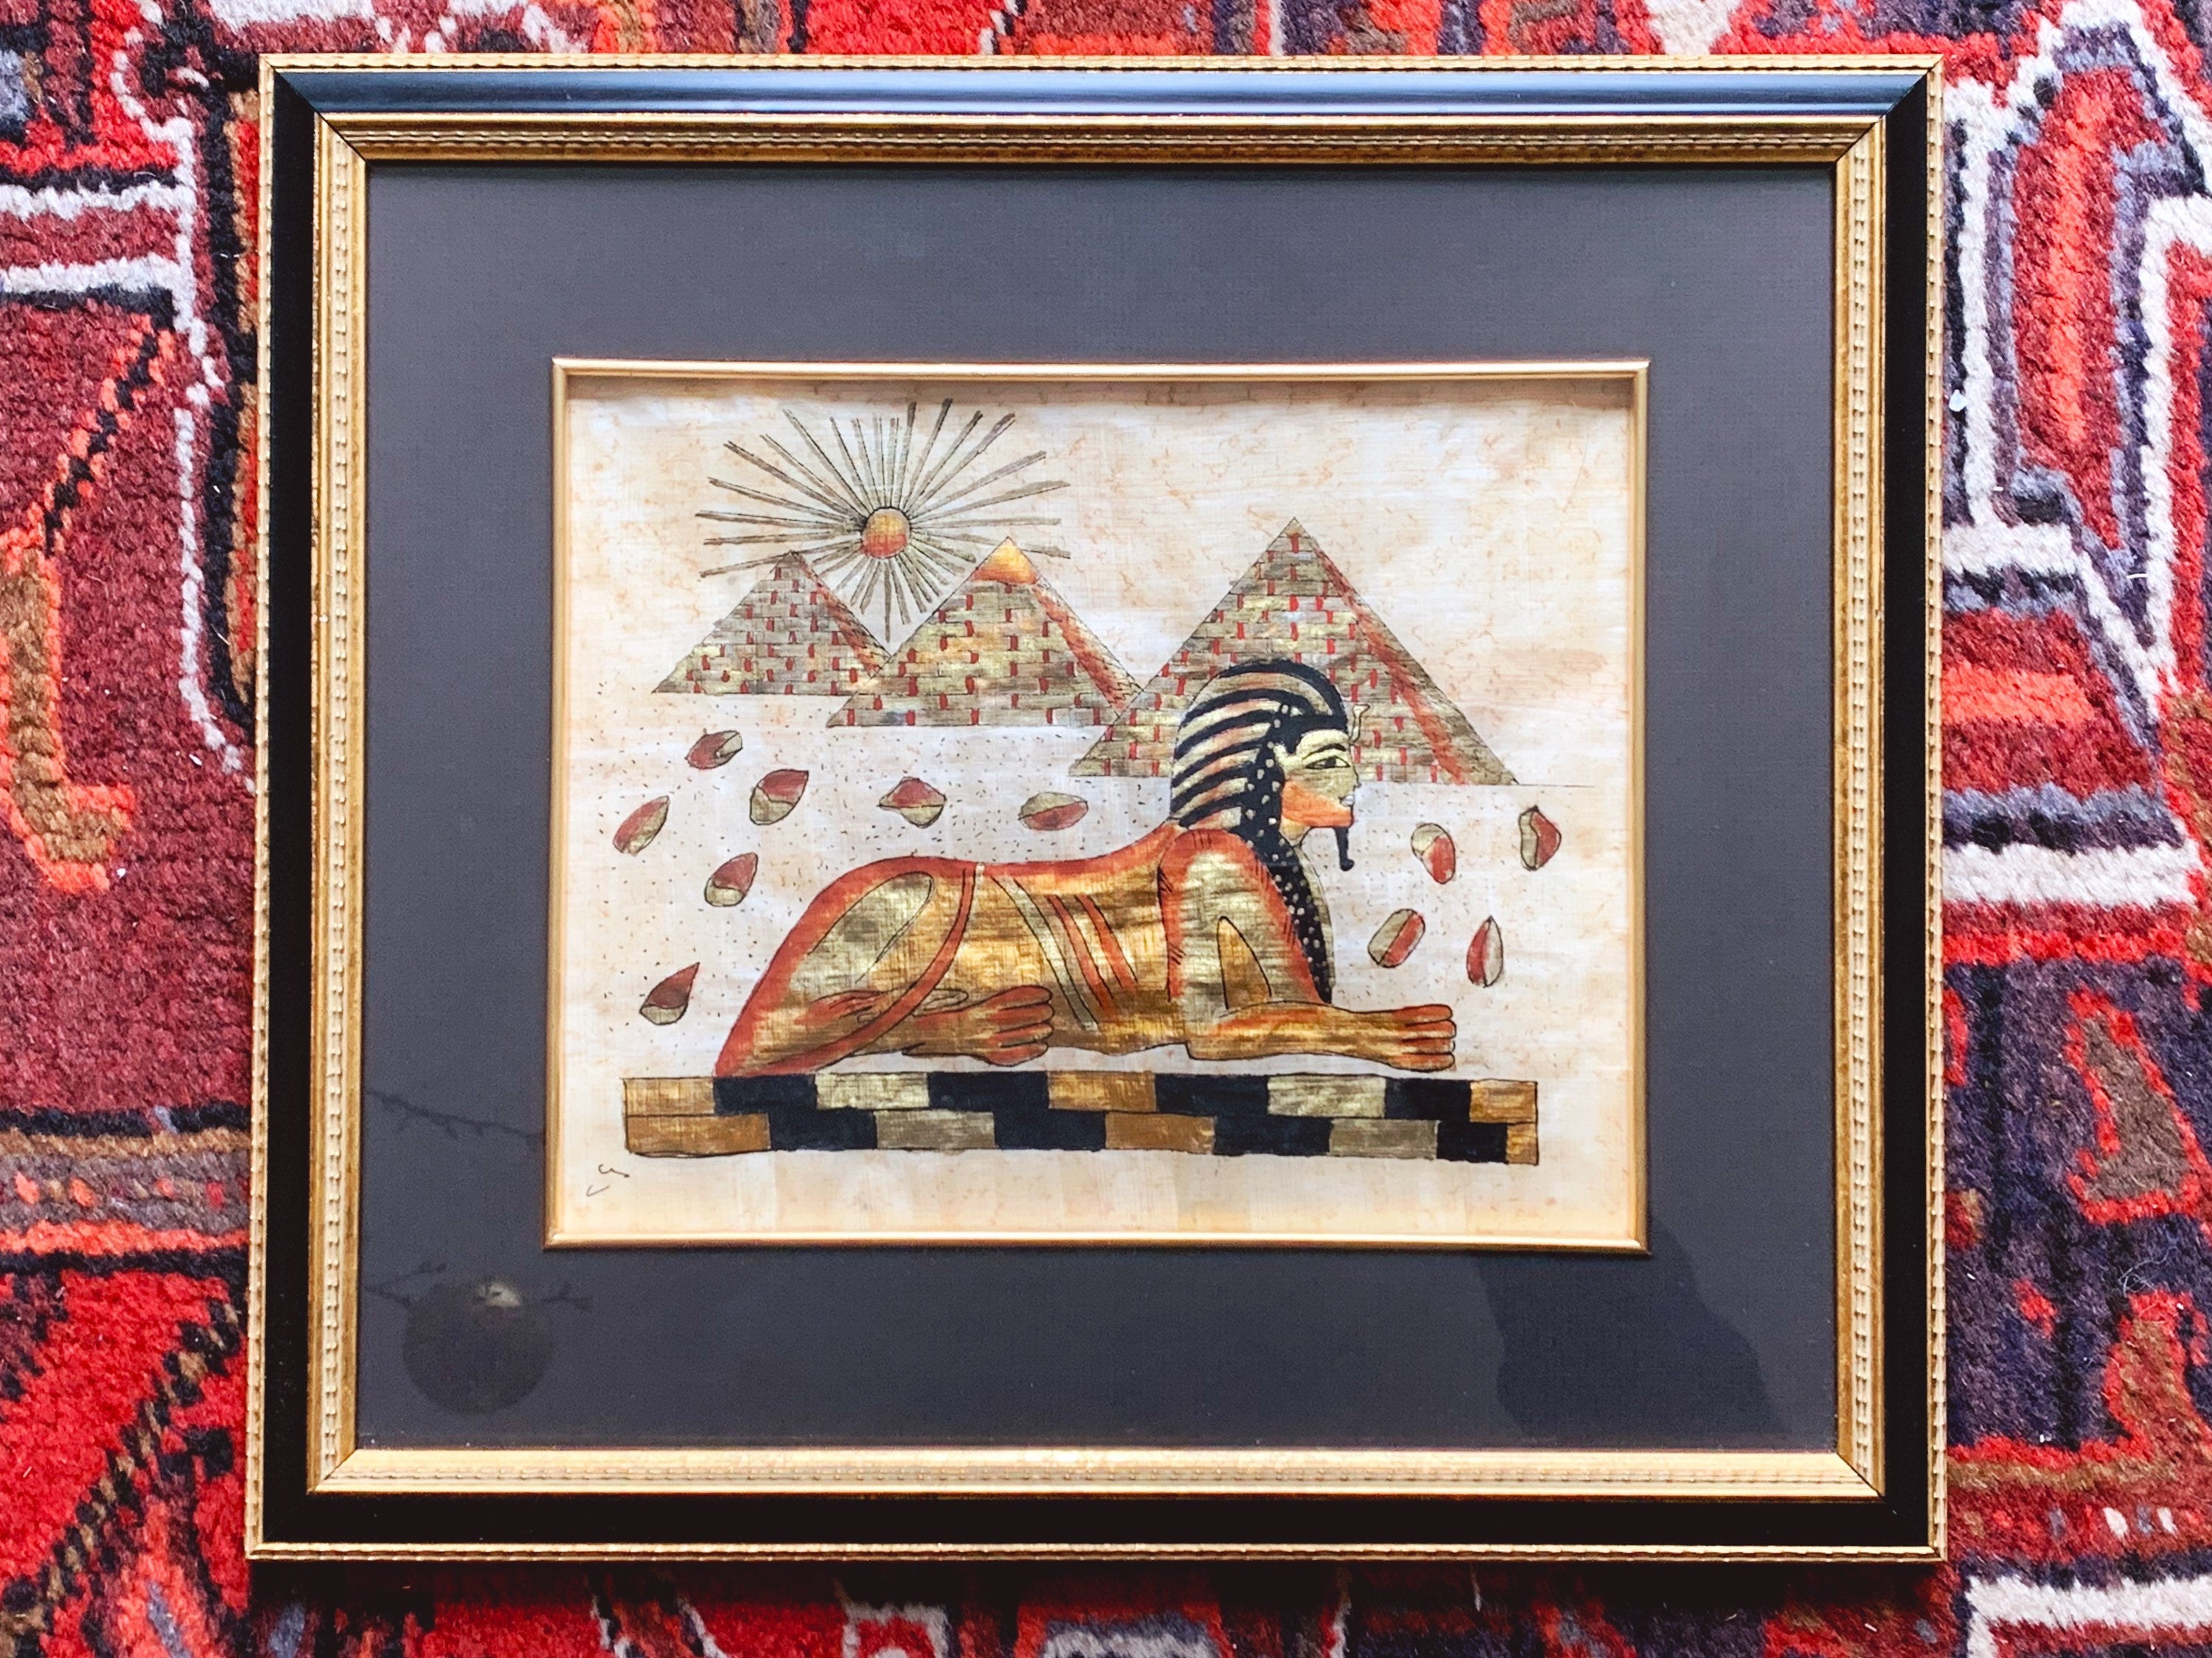 Vintage Hand Painted Egyptian Papyrus Painting in Black and Gold Wooden Frame | Collectible Art of Great Sphinx of Giza Pyramids Hieroglyphs